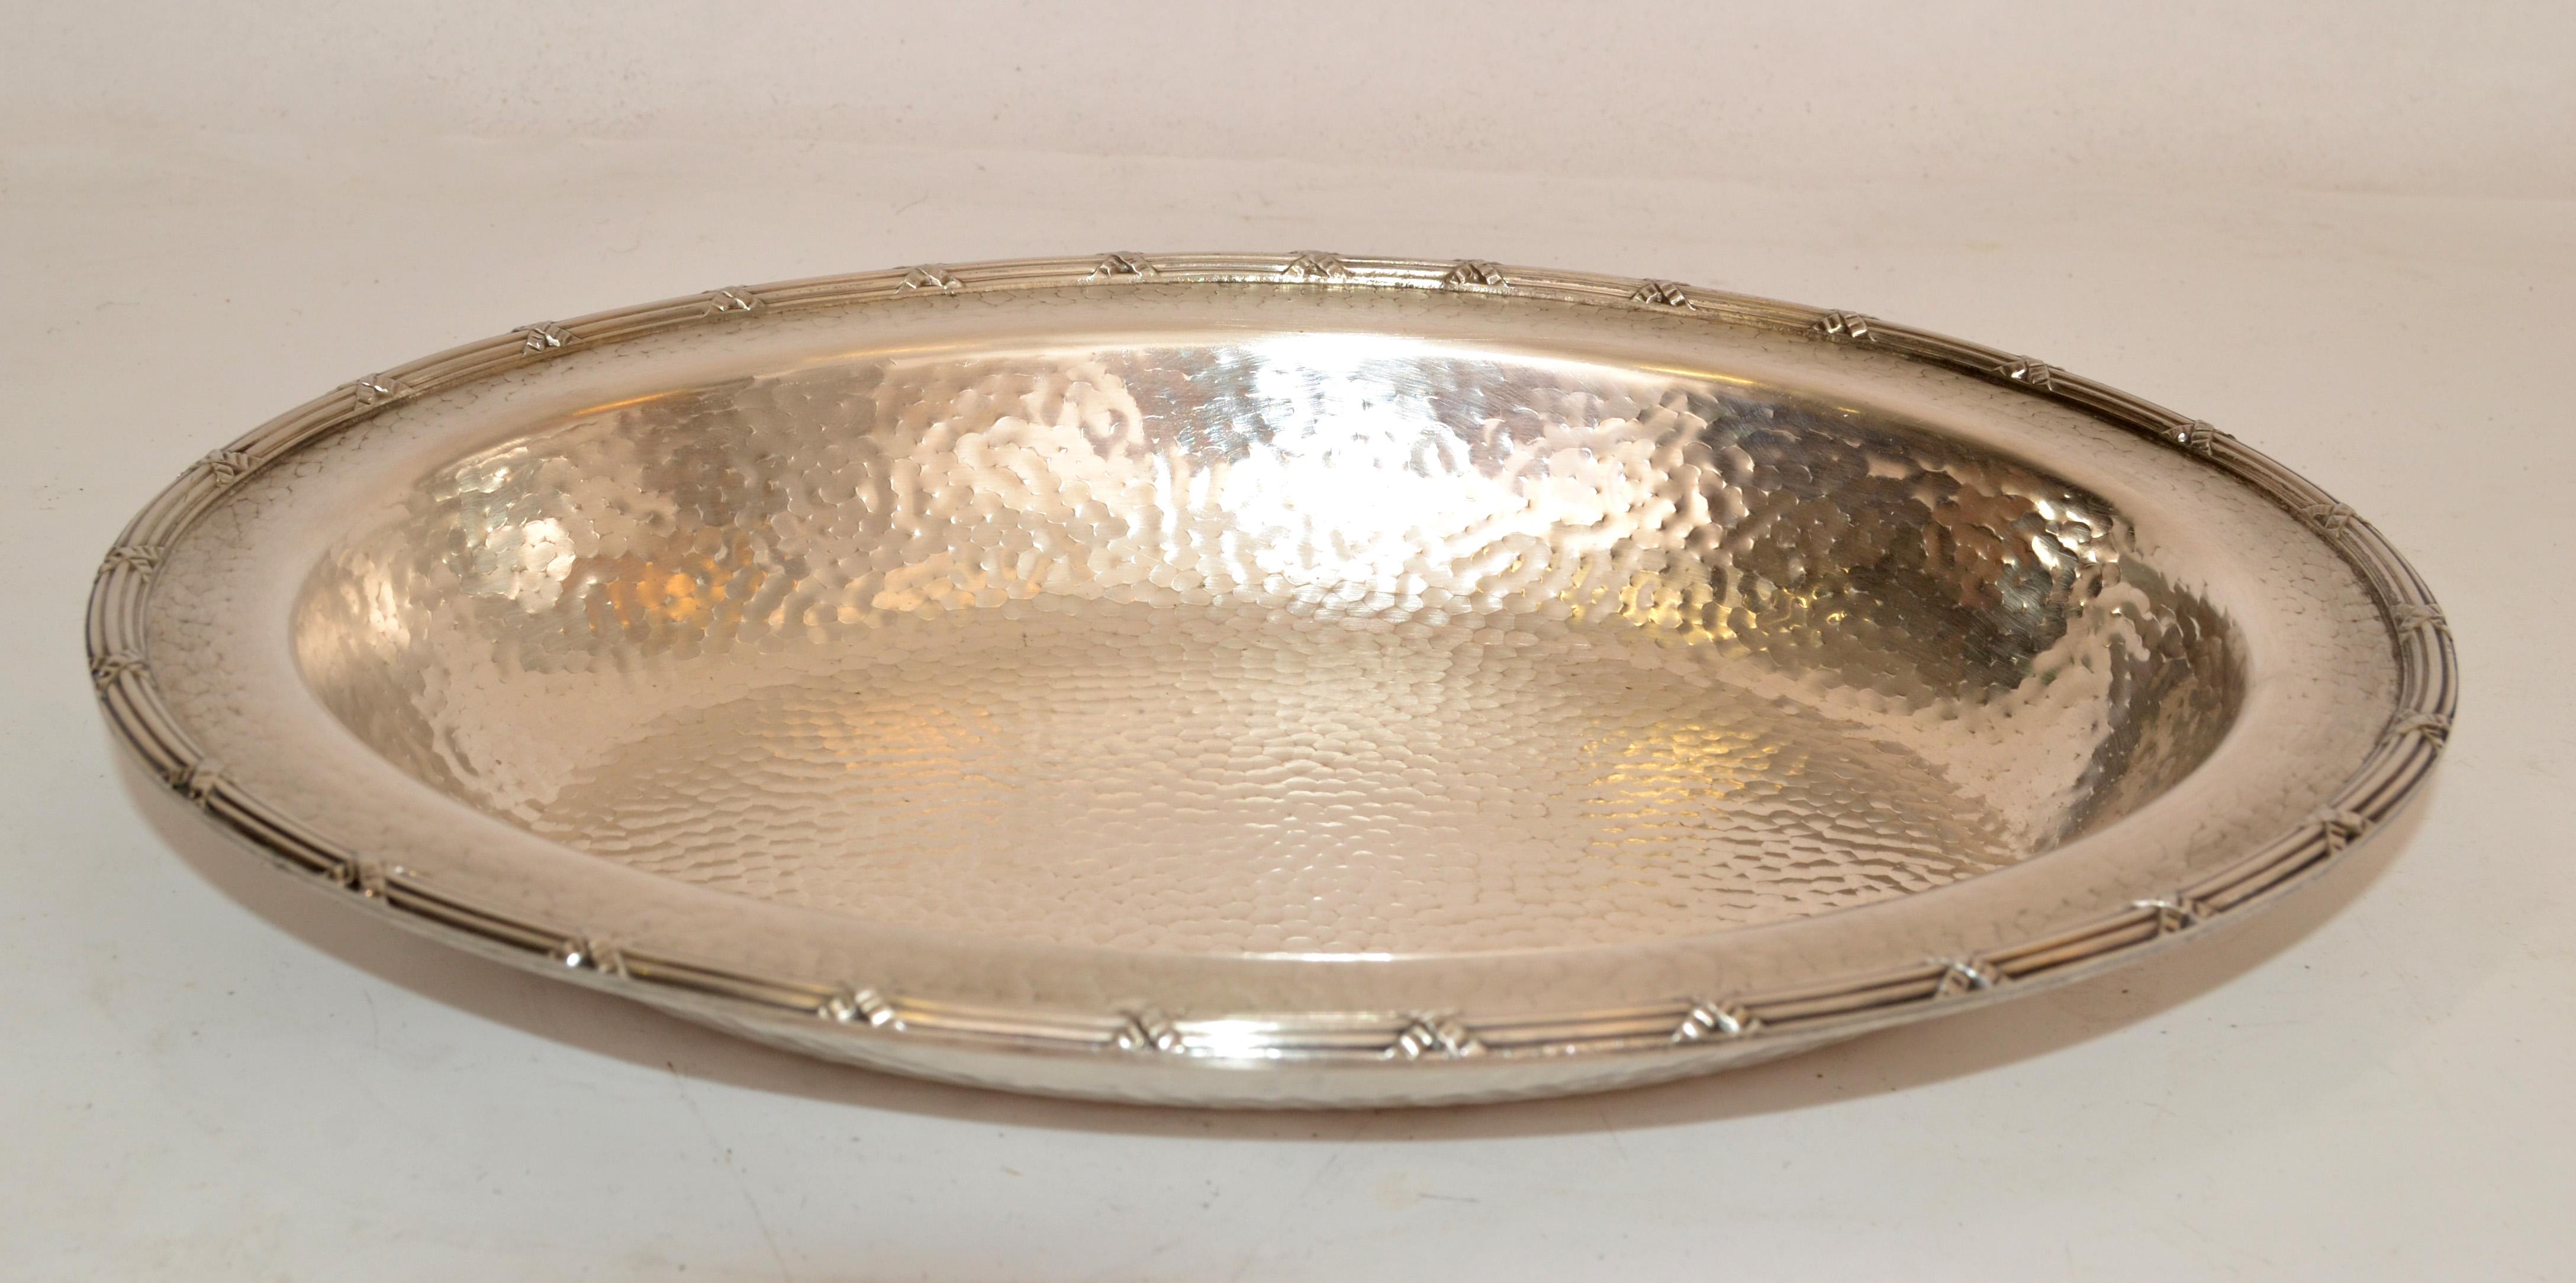 Art Deco 1969 Hand-Hammered Silver Plate EPNS 2245 Centerpiece Decorative Bowl For Sale 8